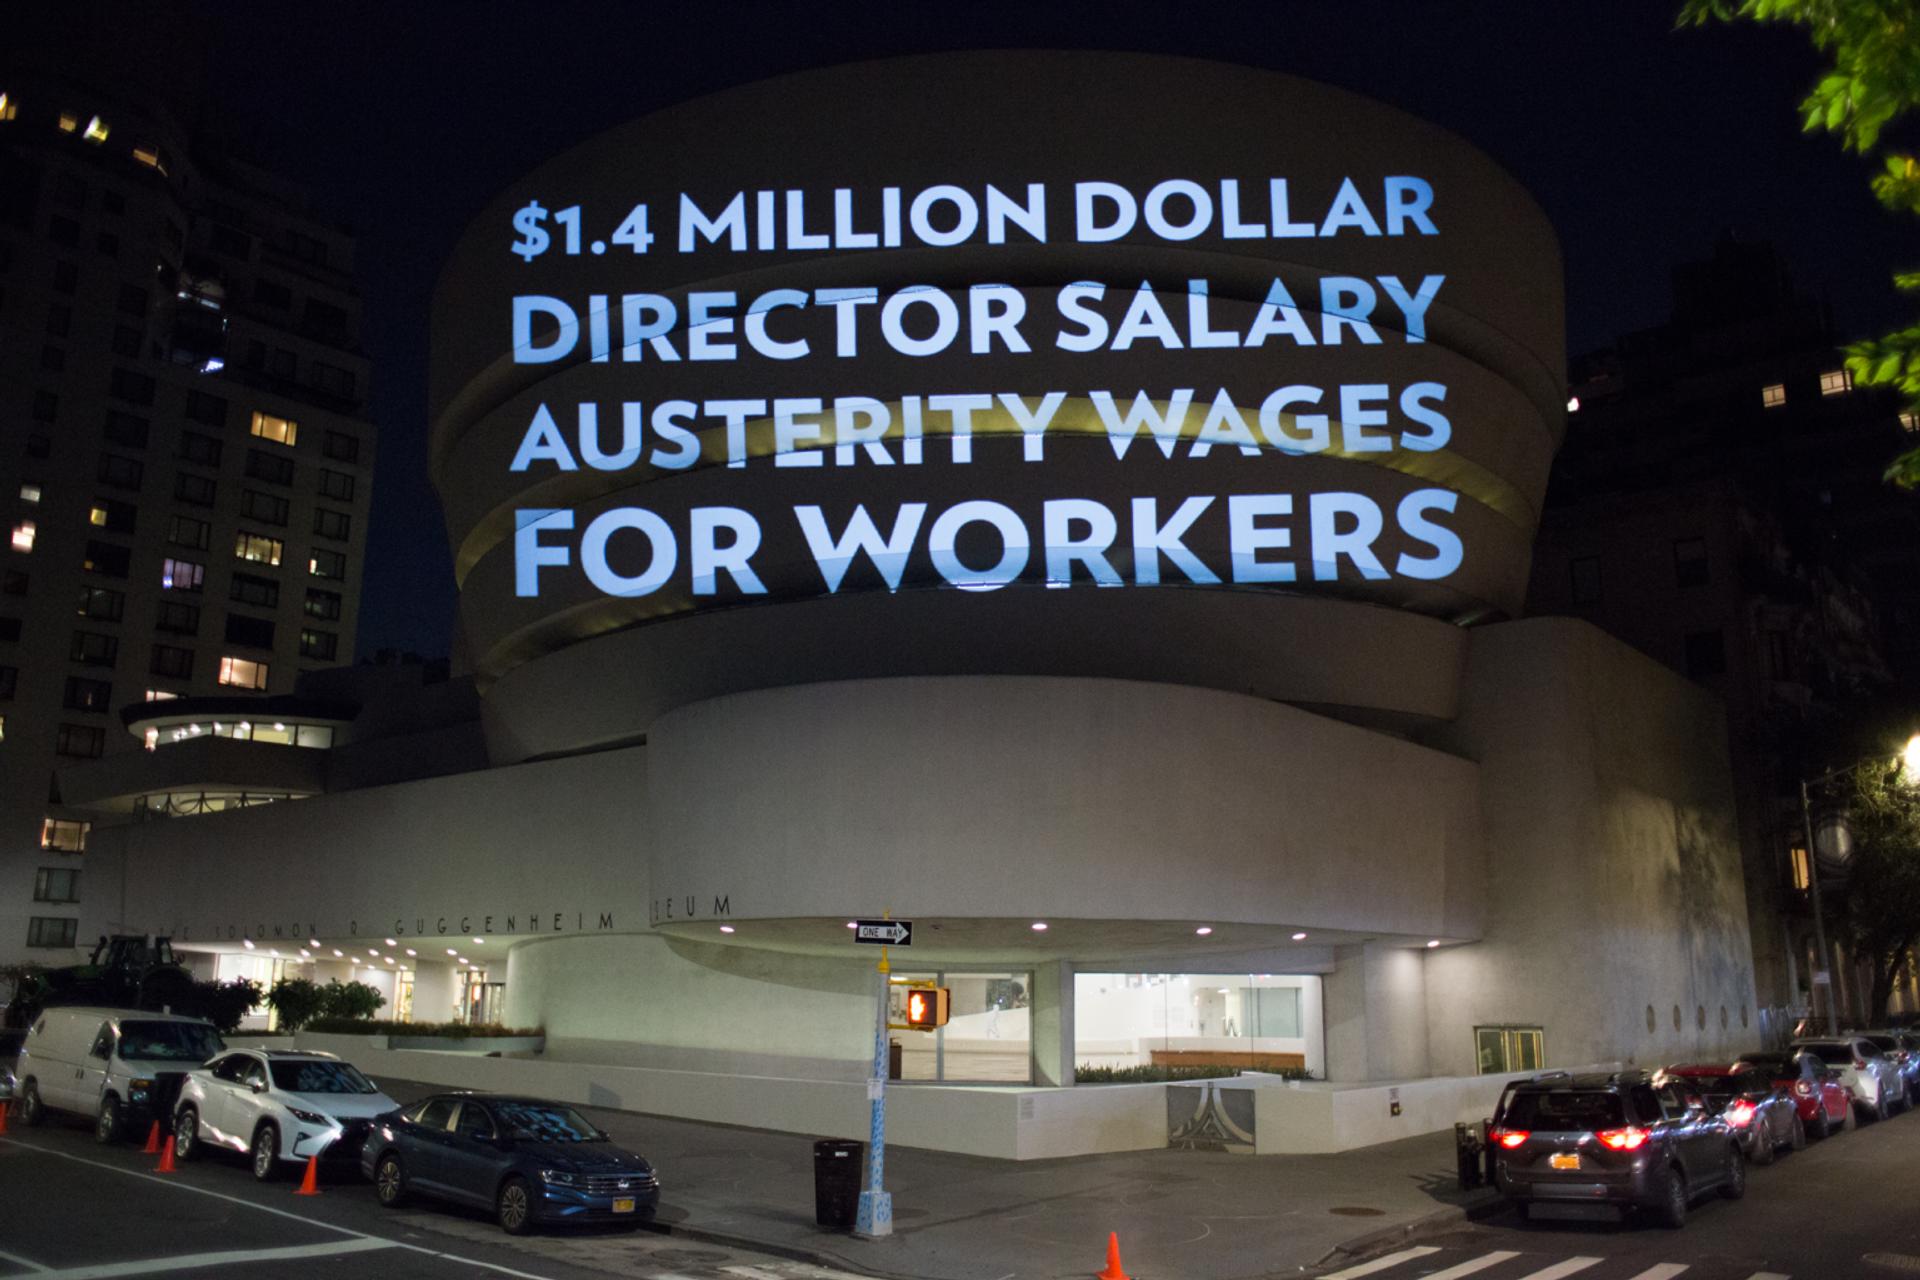 In September 2020, the week before the Guggenheim's public reopening, the artist-activist groups Artists for Workers (AFW) and The Illuminator projected a series of messages onto the Guggenheim Museum in New York in solidarity with the Guggenheim’s unionised workers © The Illuminator, courtesy AFW and The Illuminator